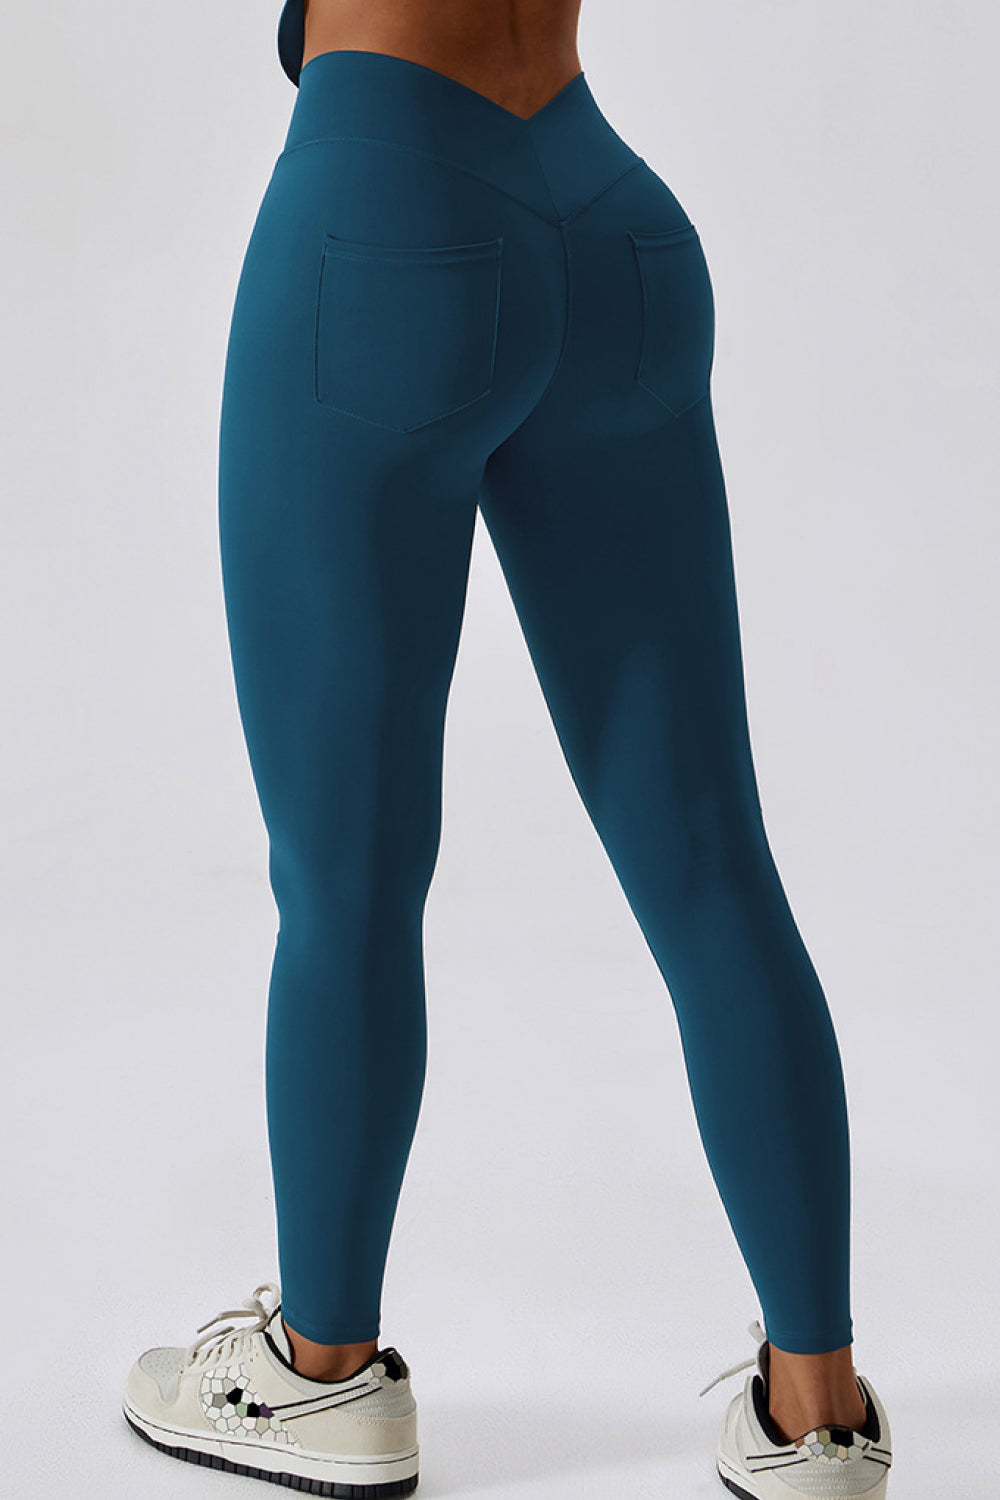 Wide Waistband Slim Fit Back Pocket Sports Leggings  Sunset and Swim Peacock  Blue S 